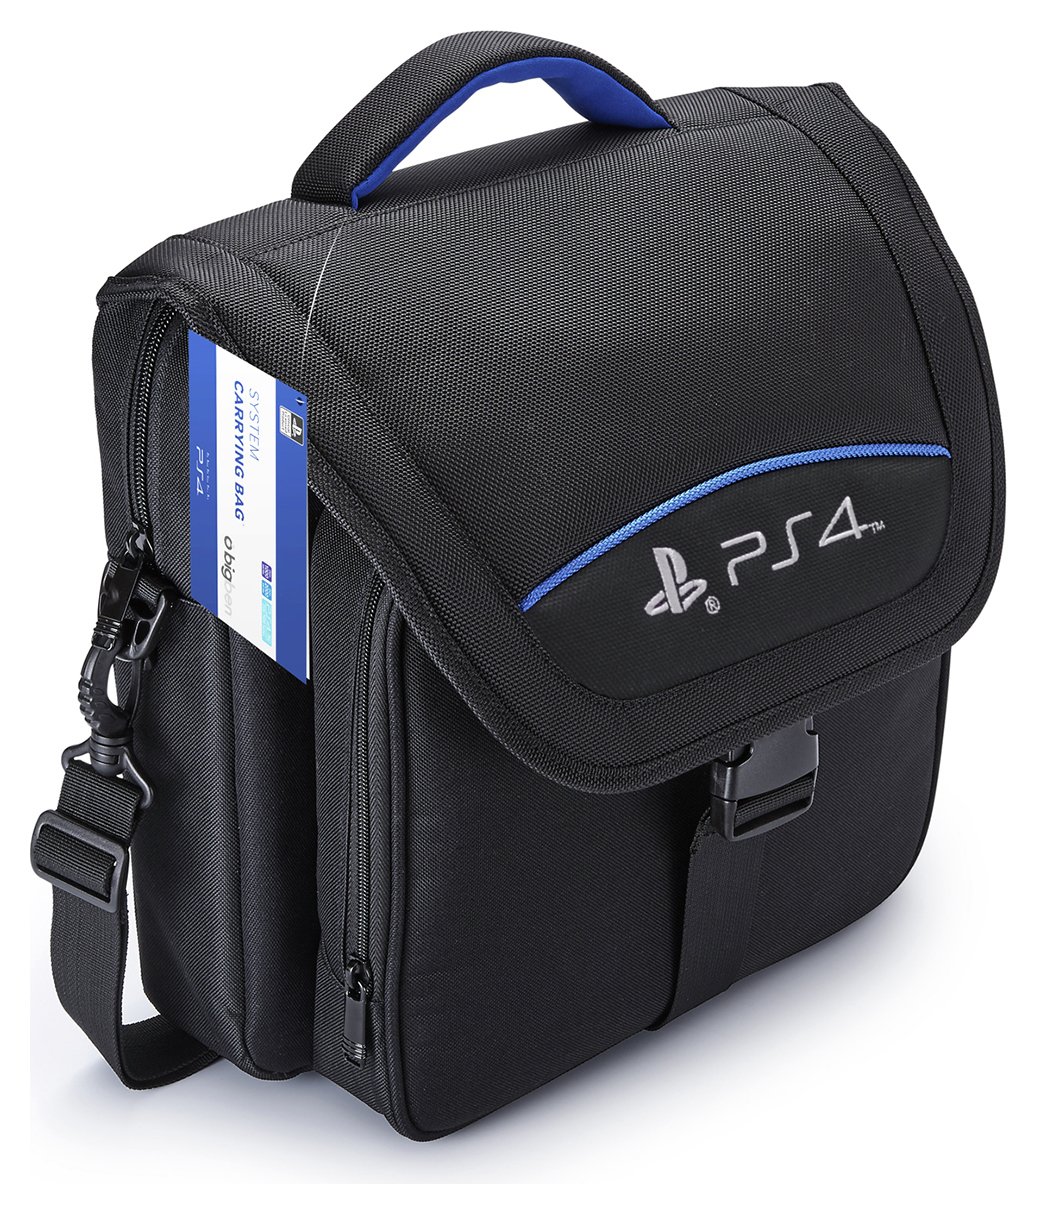 PS4 Official Licensed Console Carrying Case